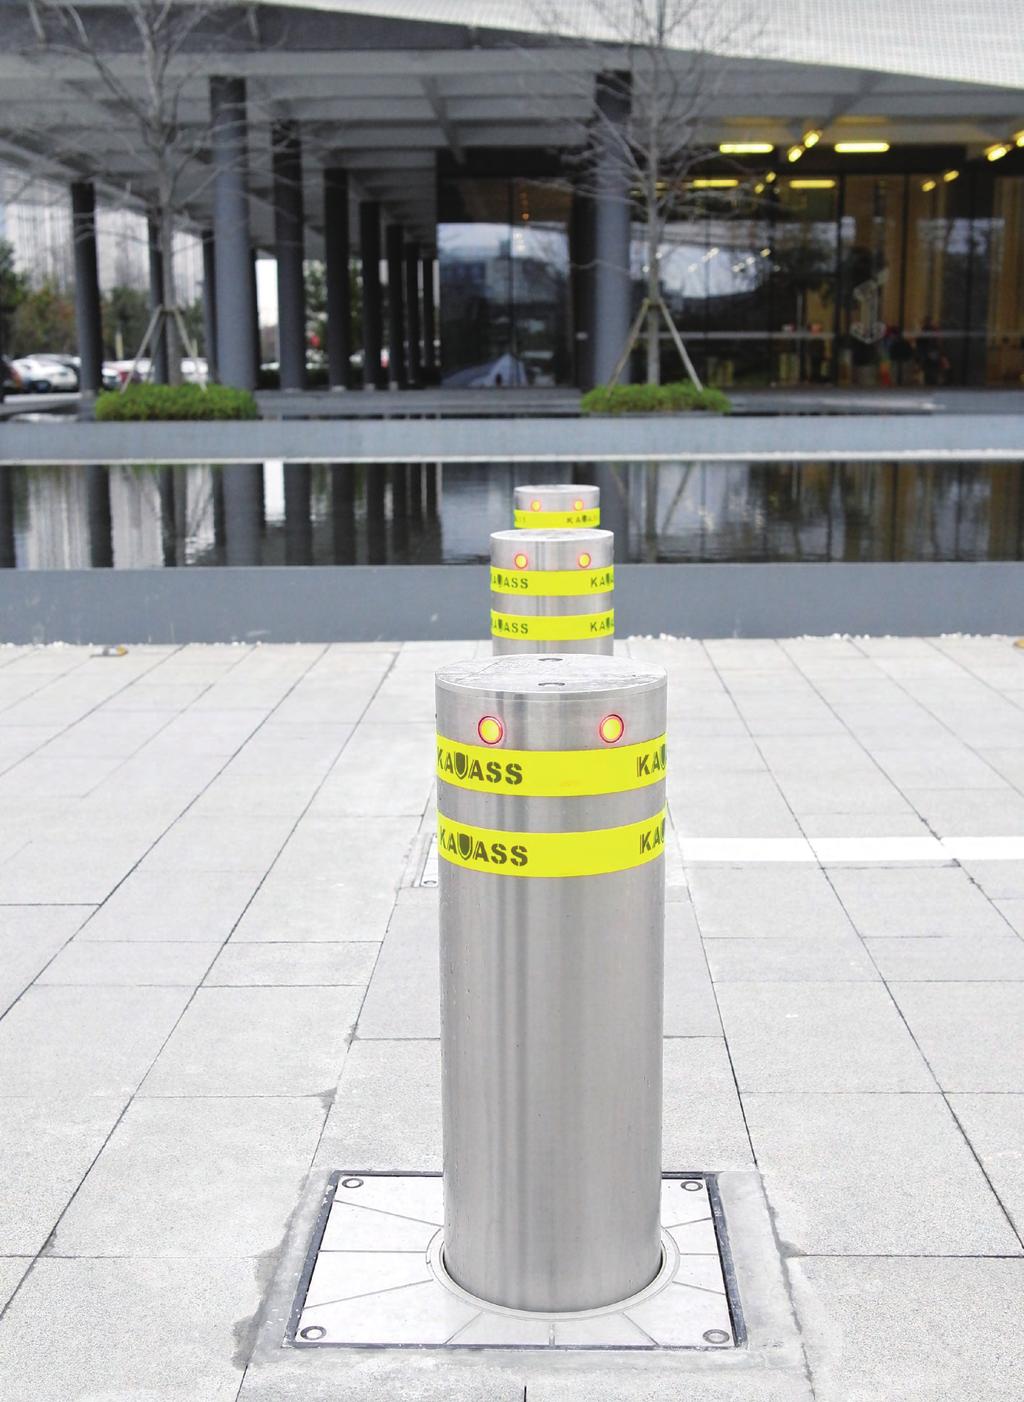 Pneumatic auto bollard Pneumatic auto bollard KAVASS pneumatic bollard is designed for repetitive cycles.